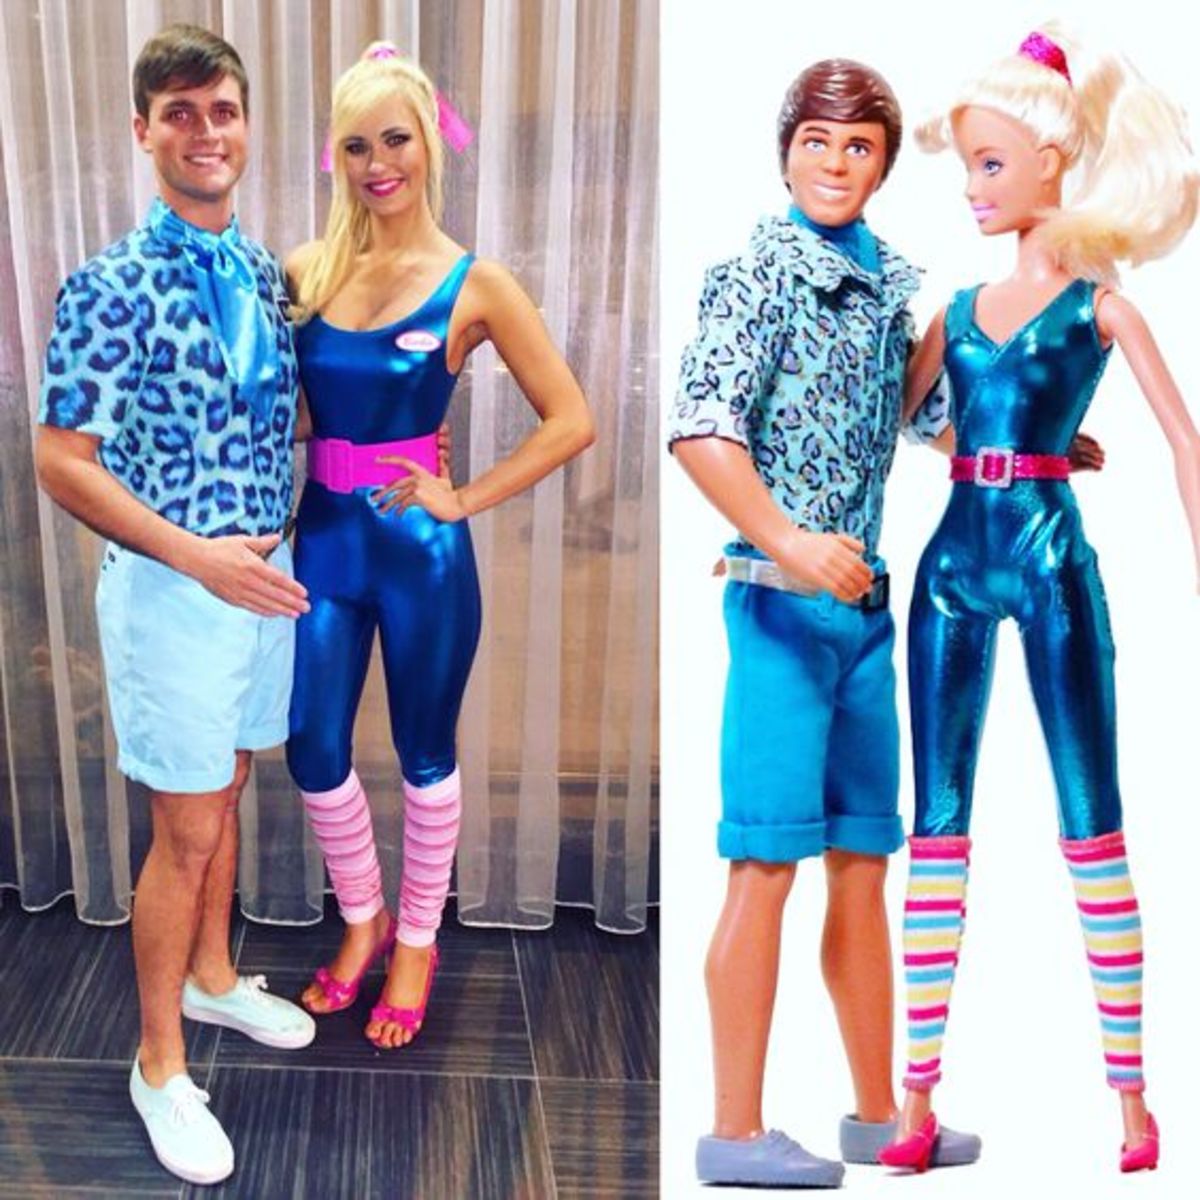 Barbie and Ken would make an entertaining couple's Halloween costume for your next party!  This can be a pretty simple costume. Raid your mother and father's closets for crazy outfits from the '80s and do your hair and makeup to look like them!